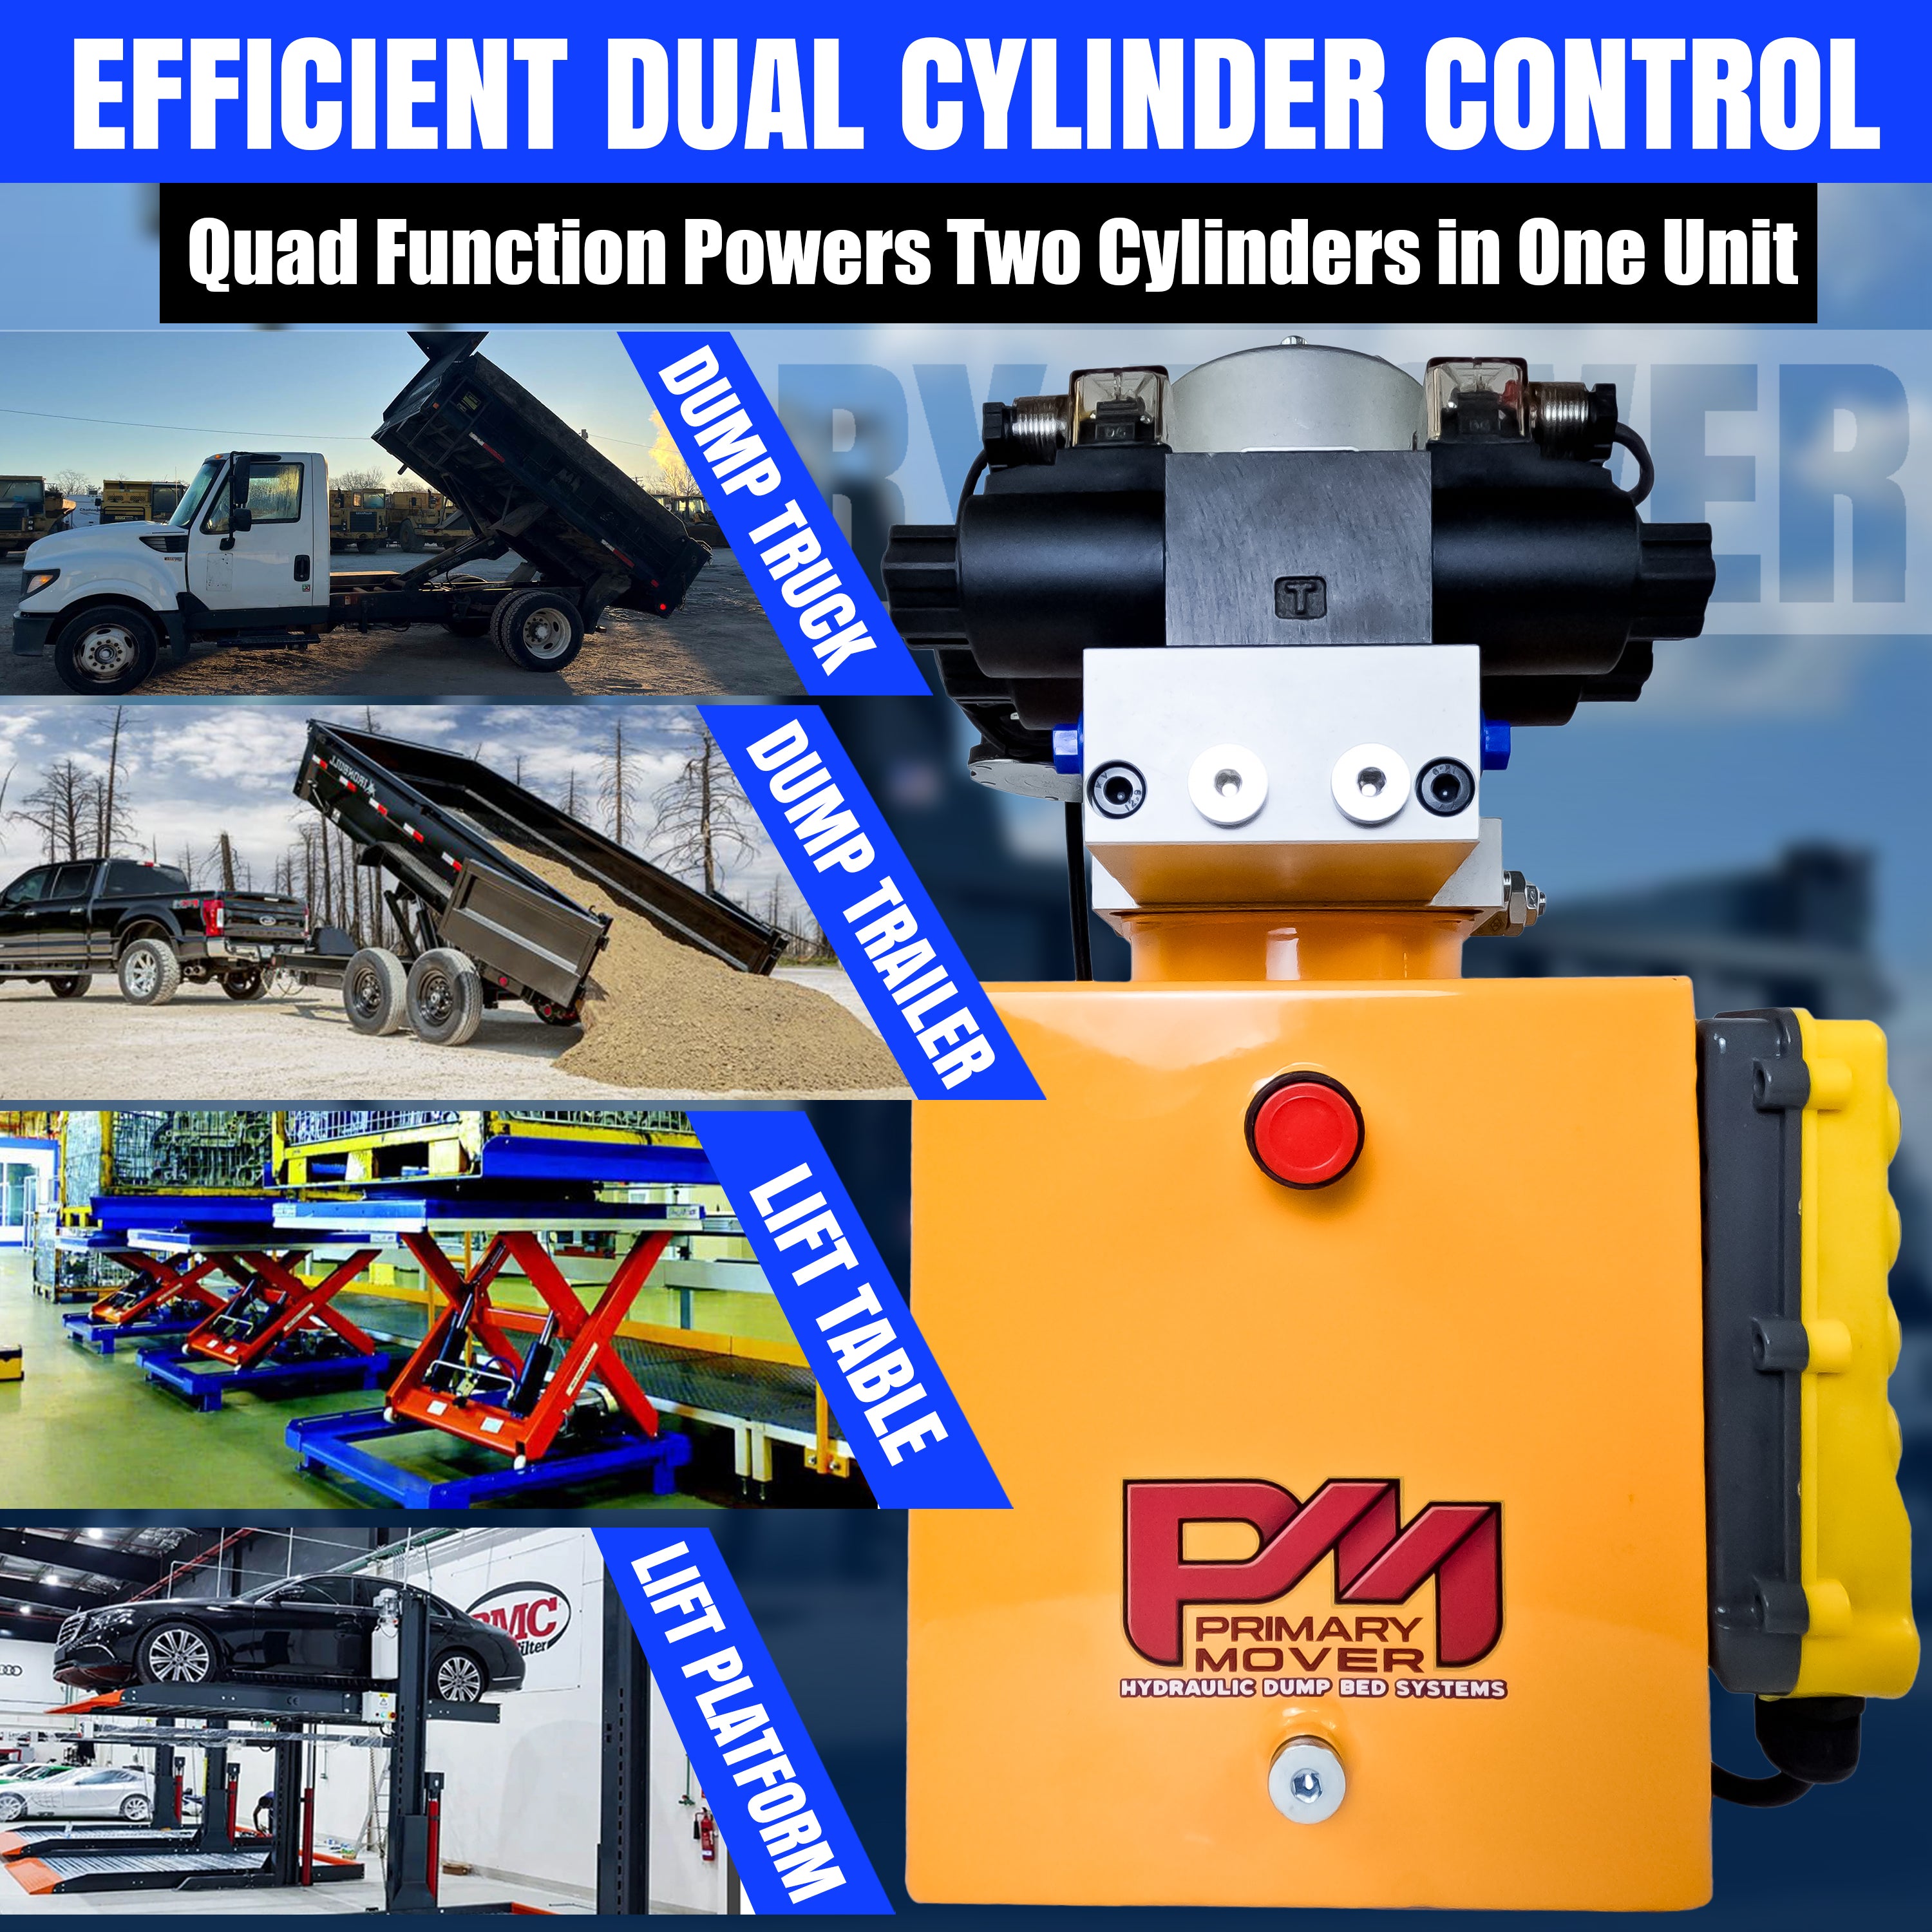 Primary Mover 12V Dual Double-Acting Hydraulic Power Unit: Compact, powerful steel unit for dump trailers and trucks, enabling four hydraulic actions simultaneously. Used for any truck or trailer application. 1/2 ton truck dump bed kit.